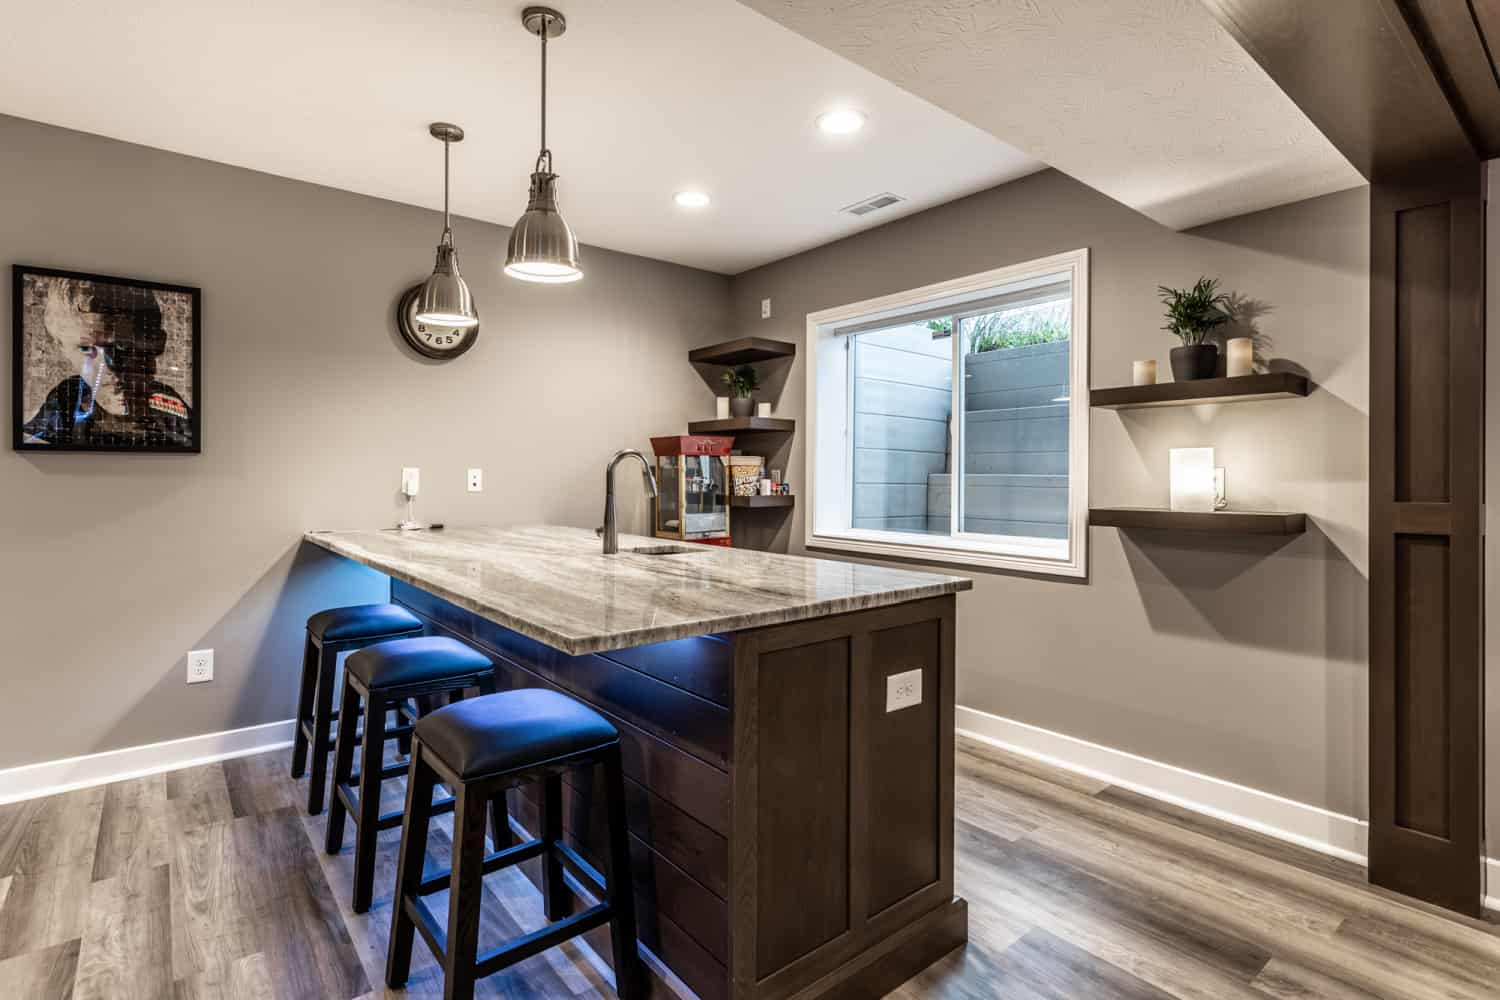 Nicholas Design Build | A kitchen with bar stools and wood floors.